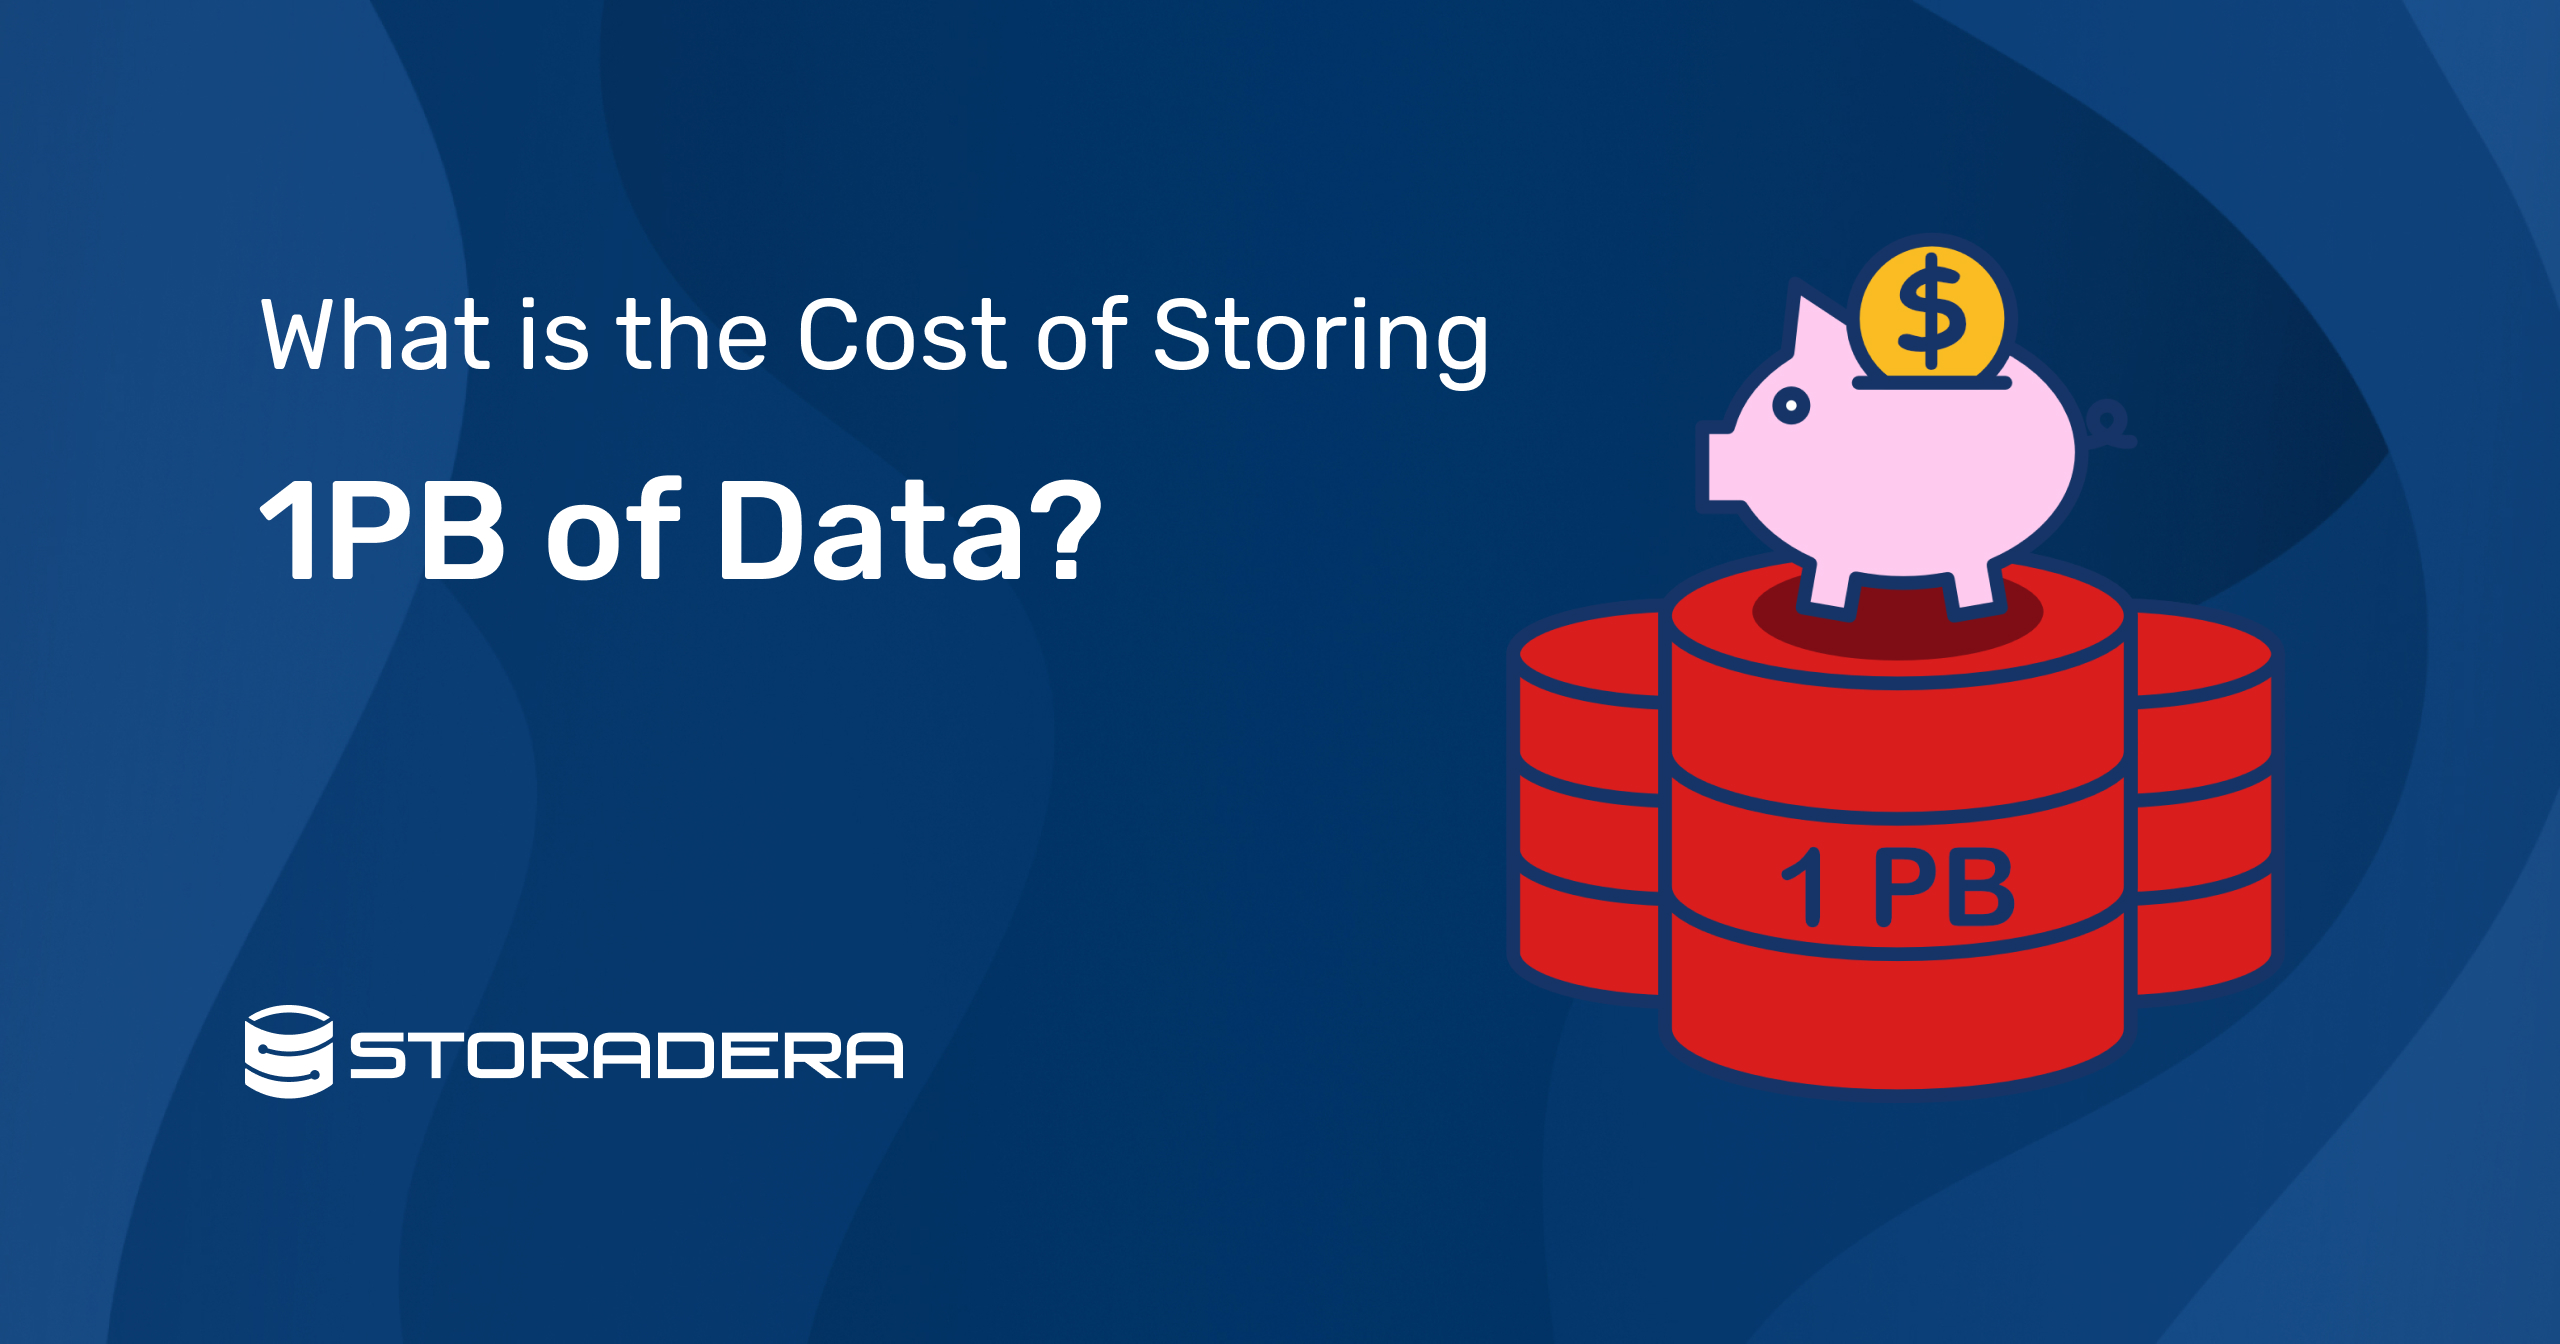 How Much Does It Cost To Store 1PB of Data?